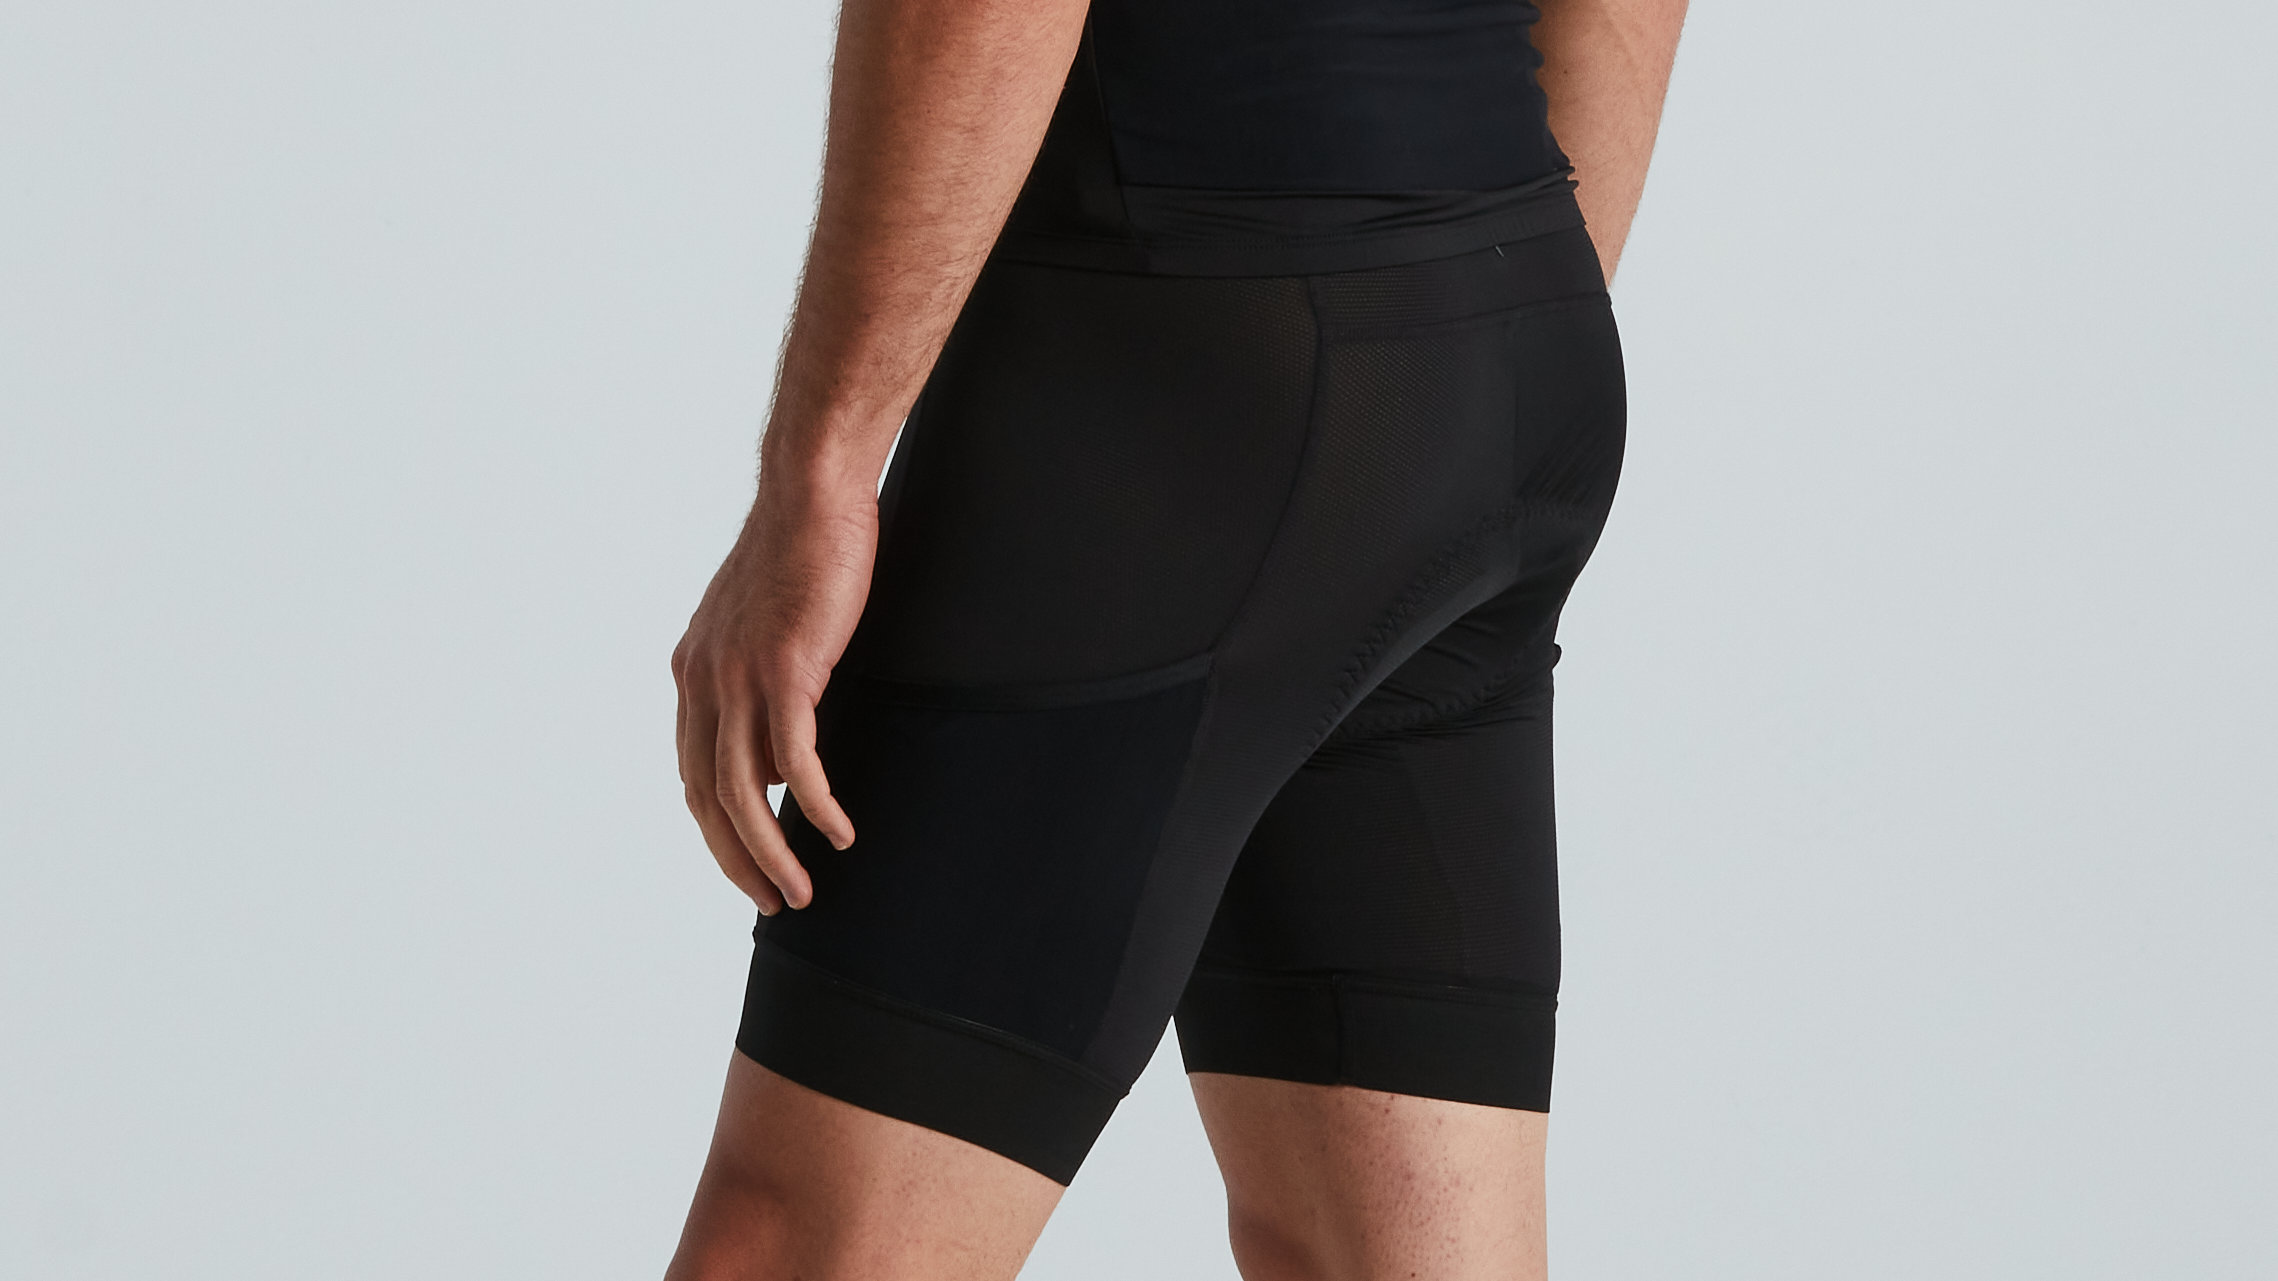 specialized swat shorts